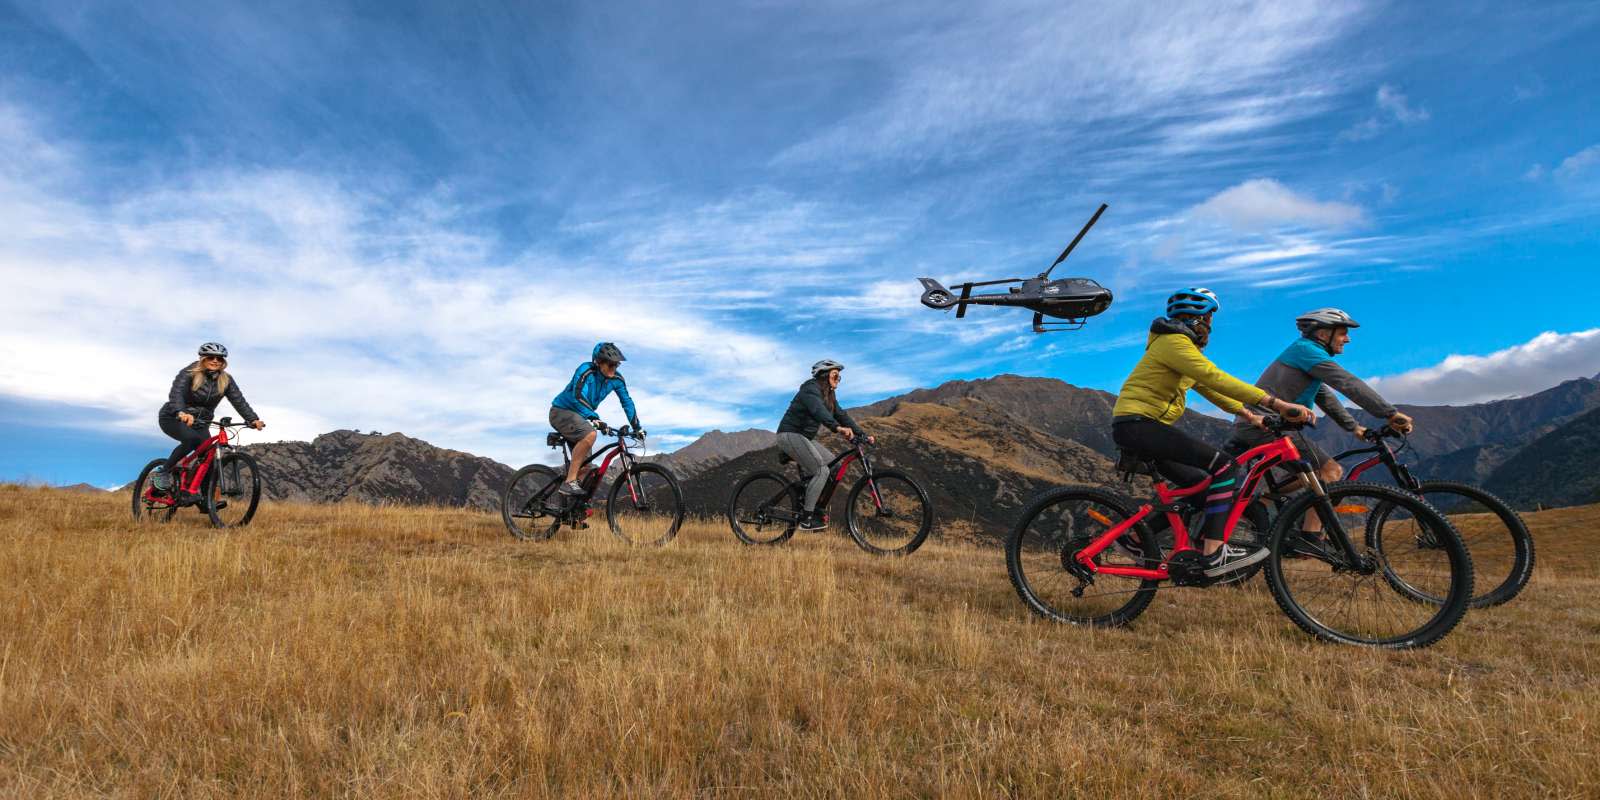 join a heli-ebiking adventure combining the thrill of a helicopter ride with riding in a high country farm